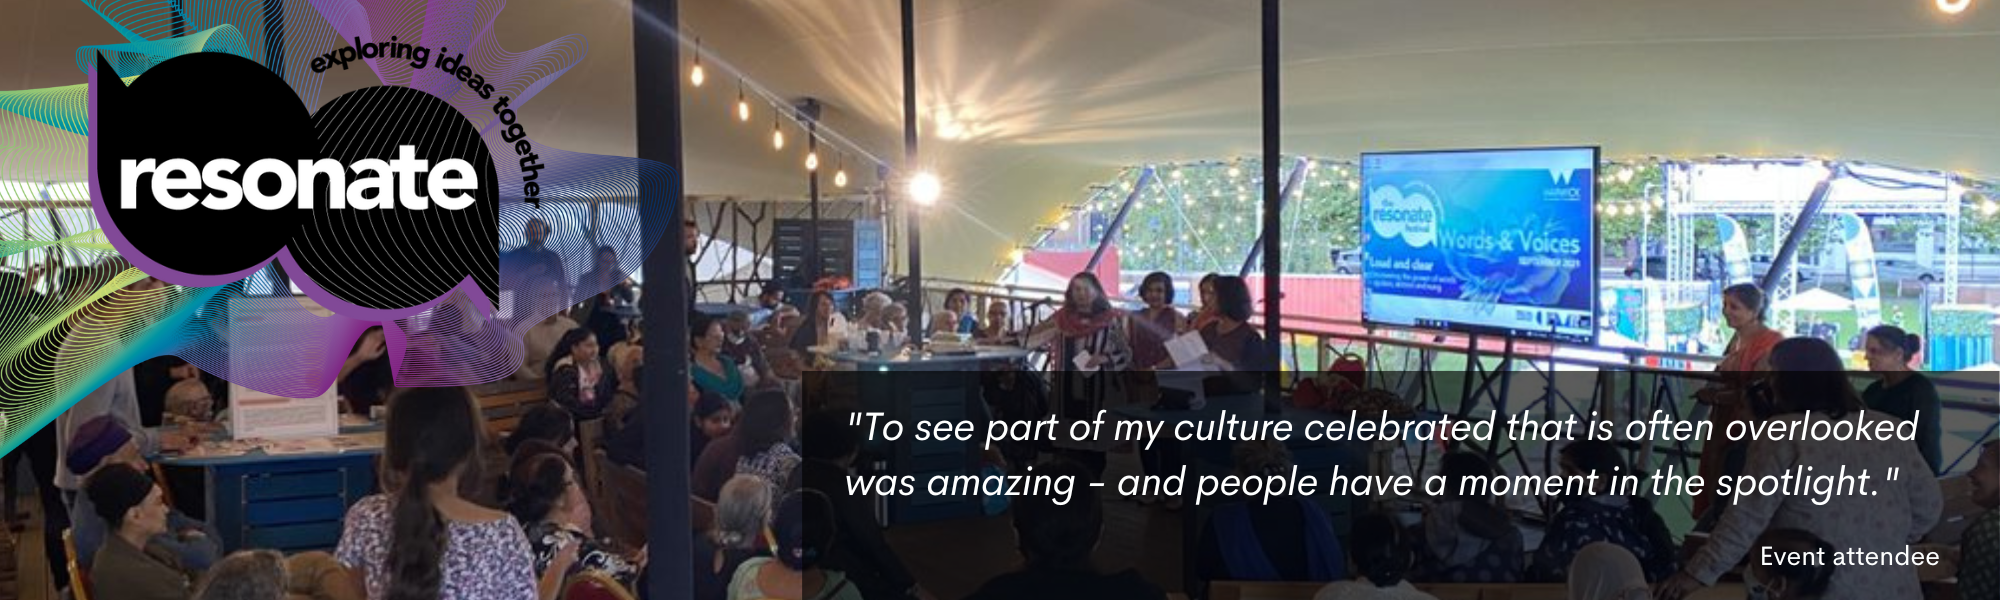 Quote against an event image, saying: "To see part of my culture celebrated that is often overlooked was amazing - and people have a moment in the spotlight." (by event atendee).